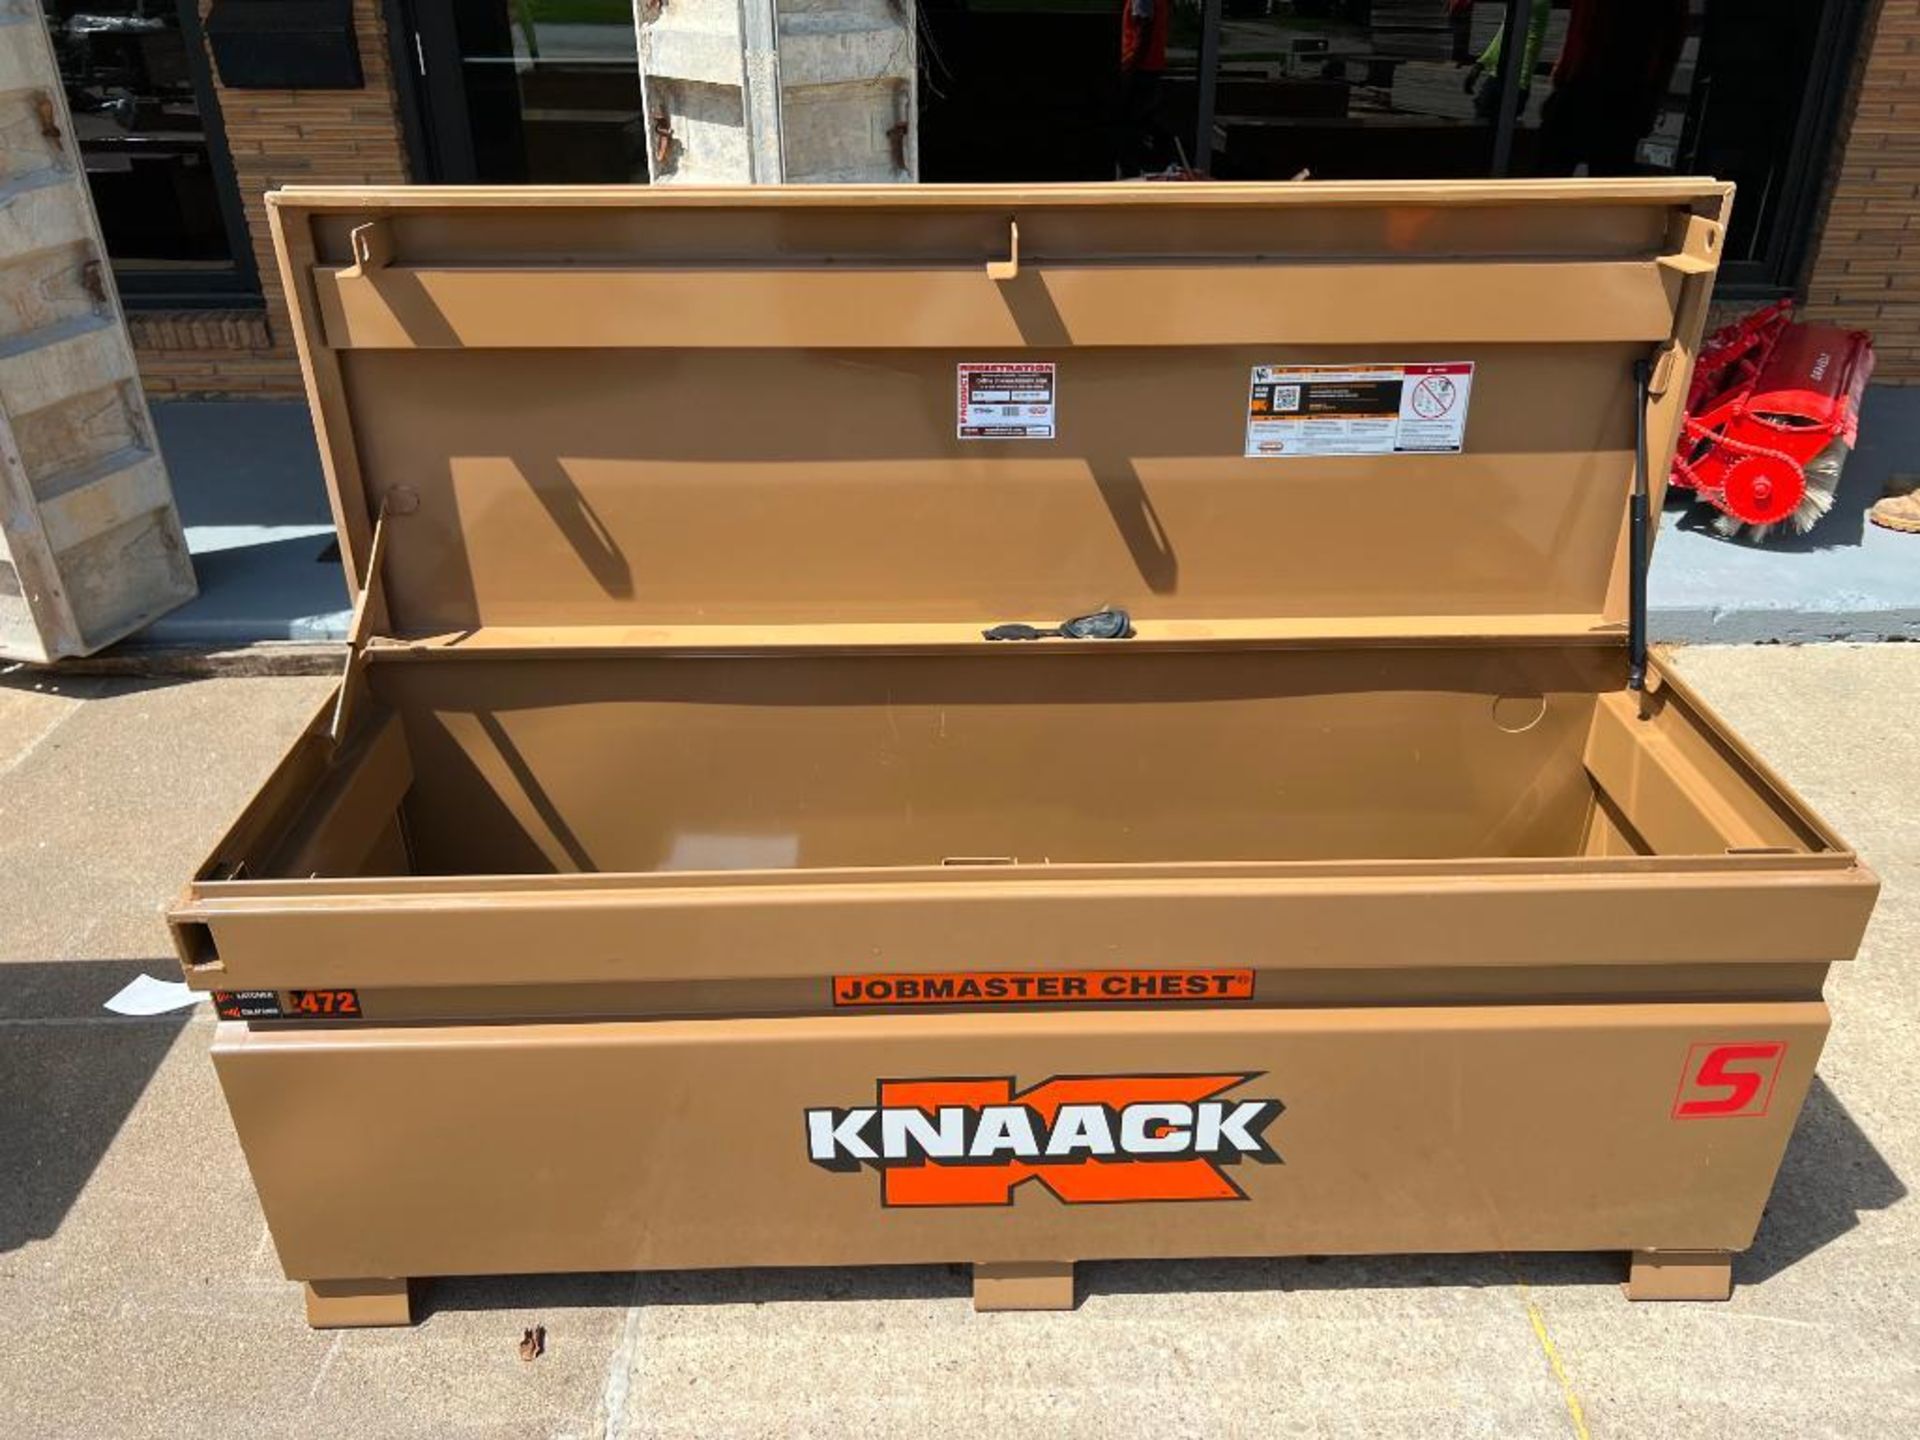 Knaack Jobmaster Chest, Model #2472, Serial #2210917034. Located in Mt. Pleasant, IA - Image 3 of 3